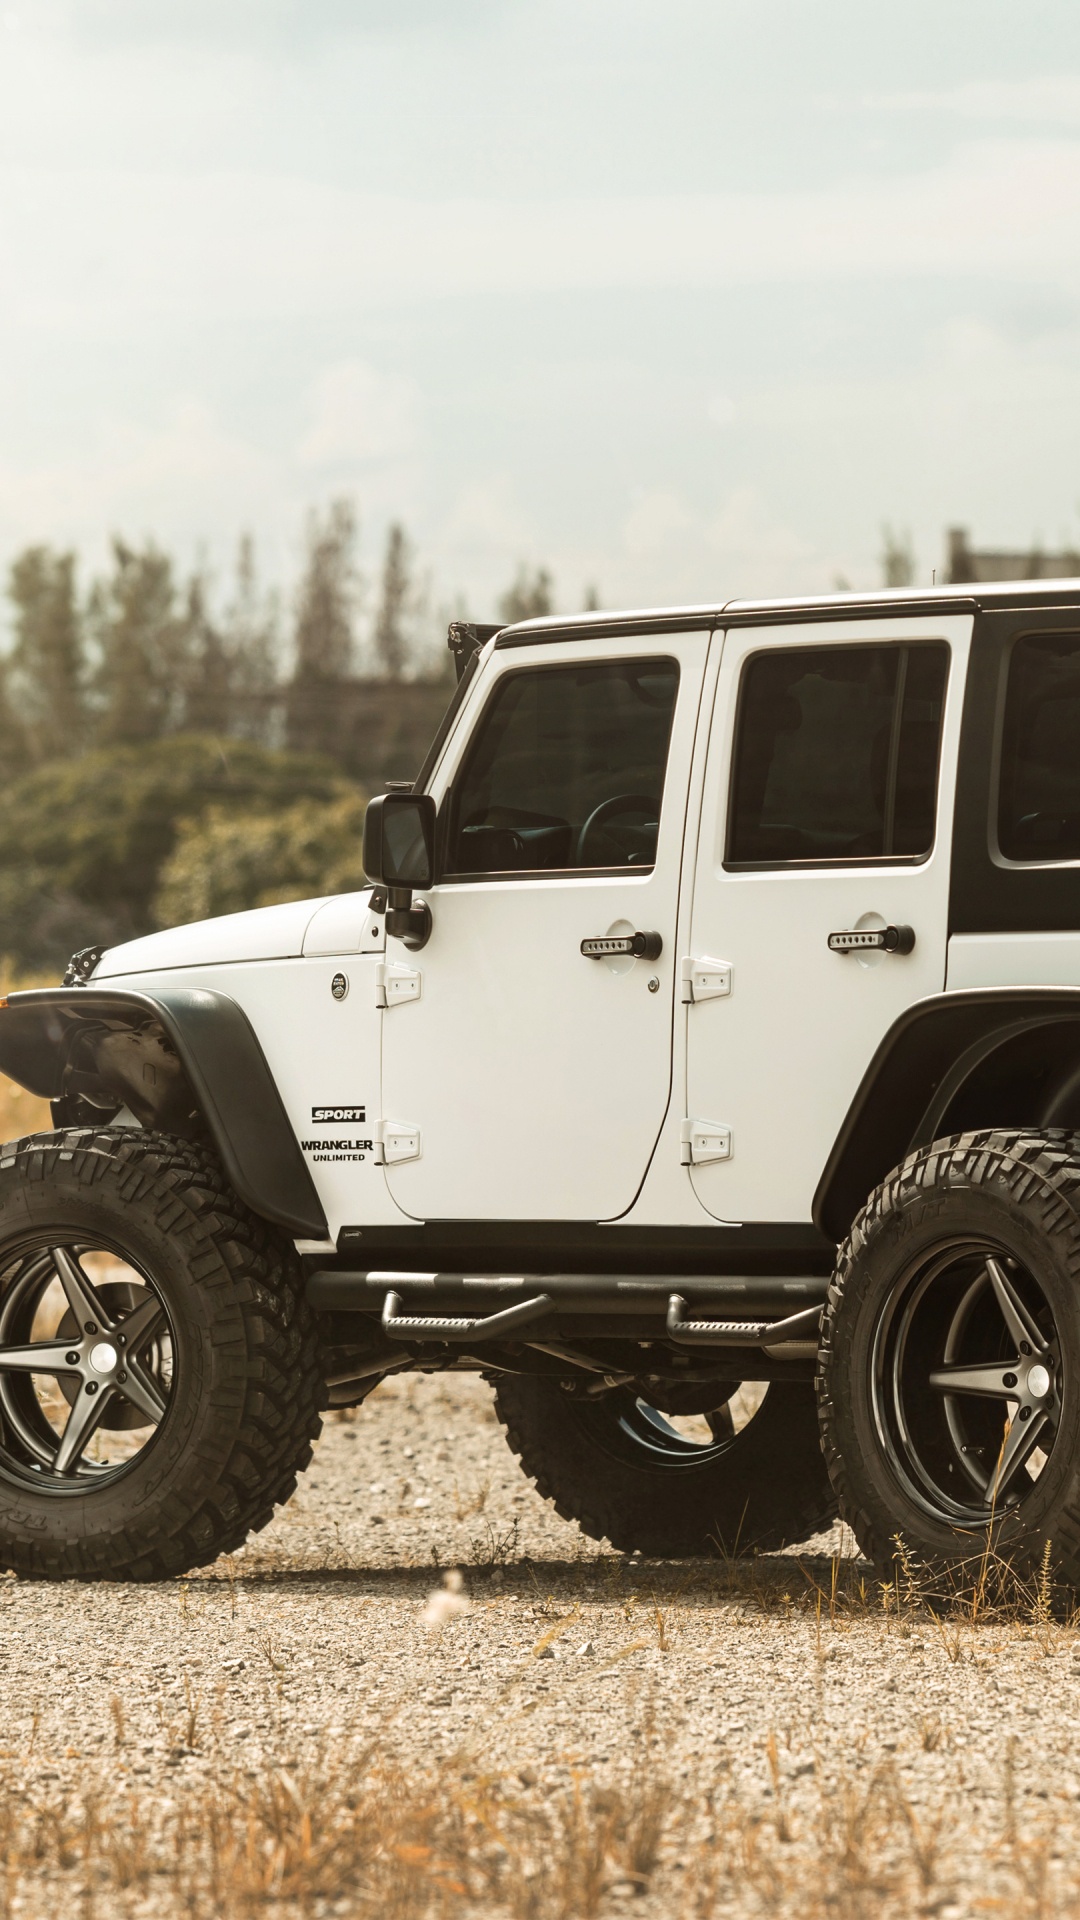 White and Black Jeep Wrangler on Brown Field During Daytime. Wallpaper in 1080x1920 Resolution